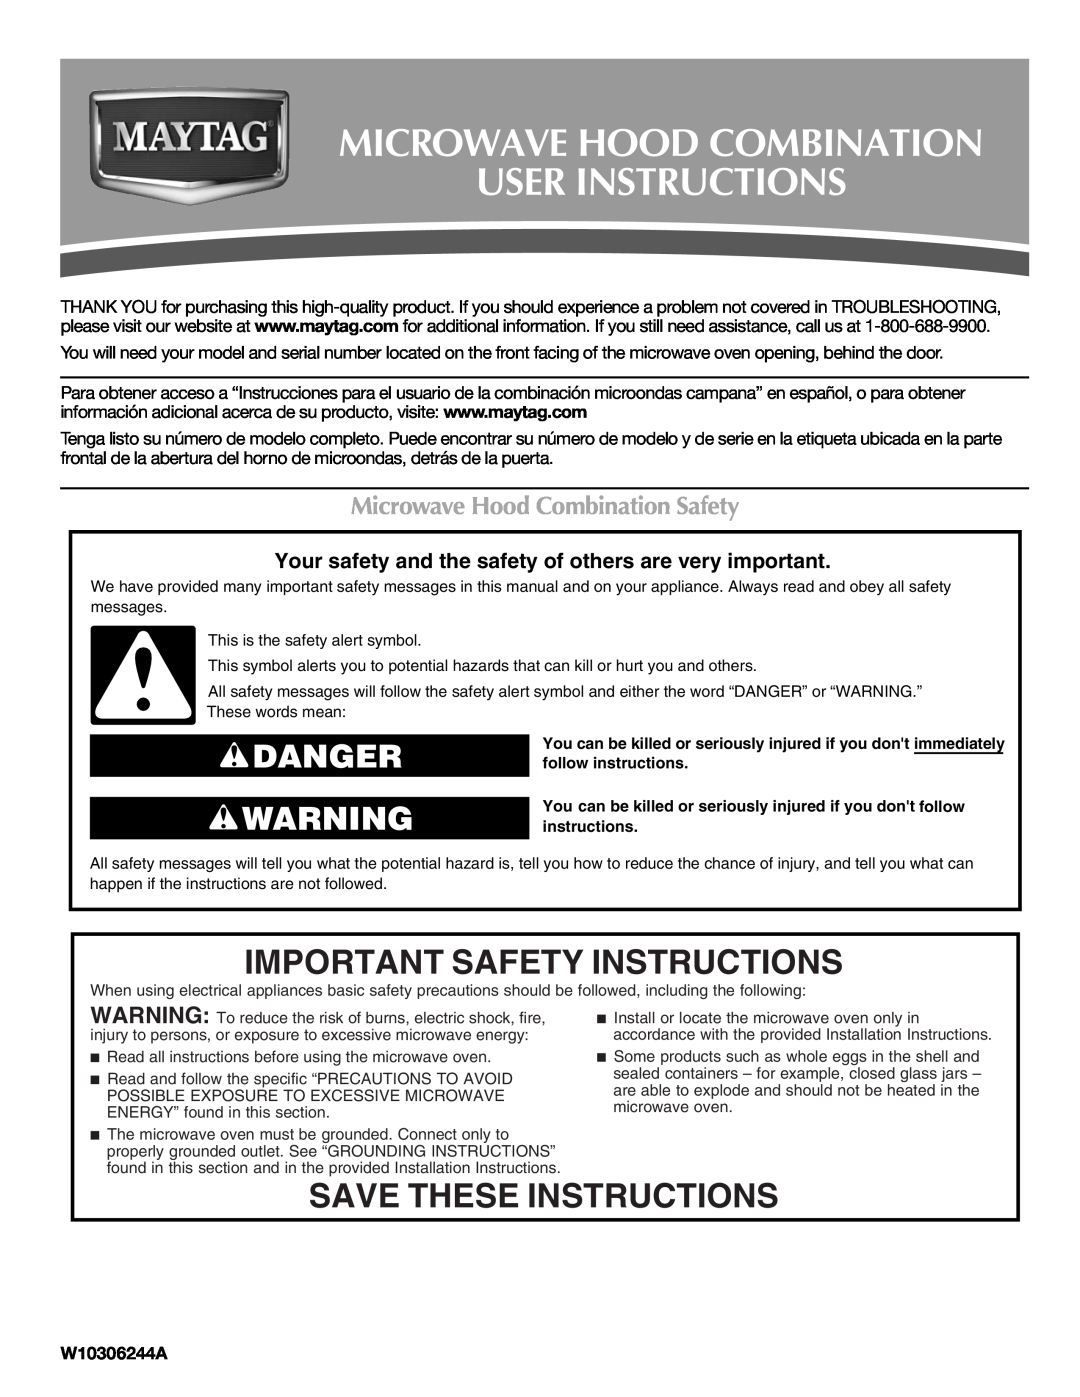 Maytag W10306244A, MMV4203WS important safety instructions Important Safety Instructions, Save These Instructions, Danger 